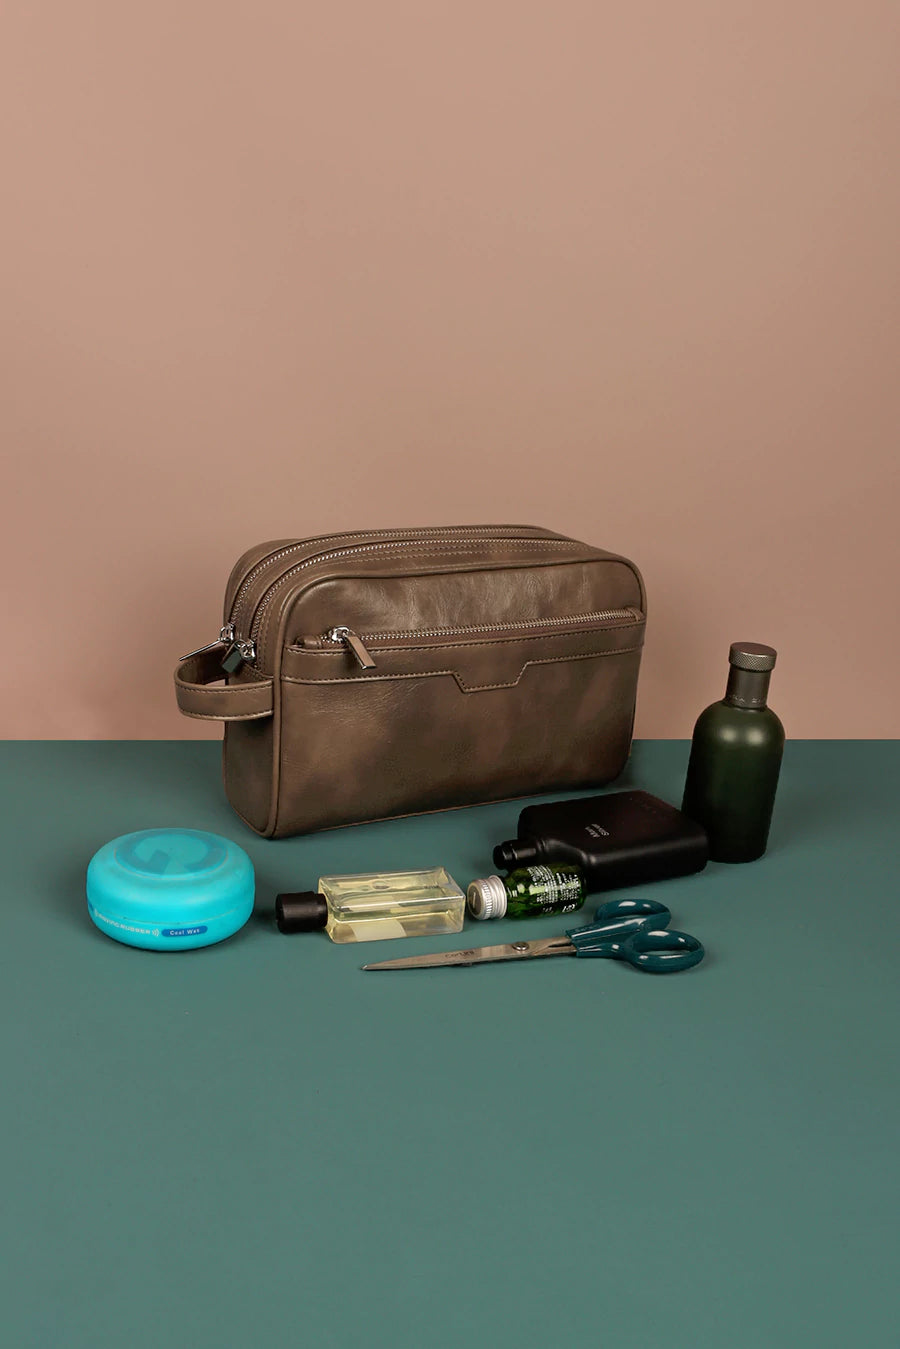 The Vegan Leather Travel Toiletry Pouch